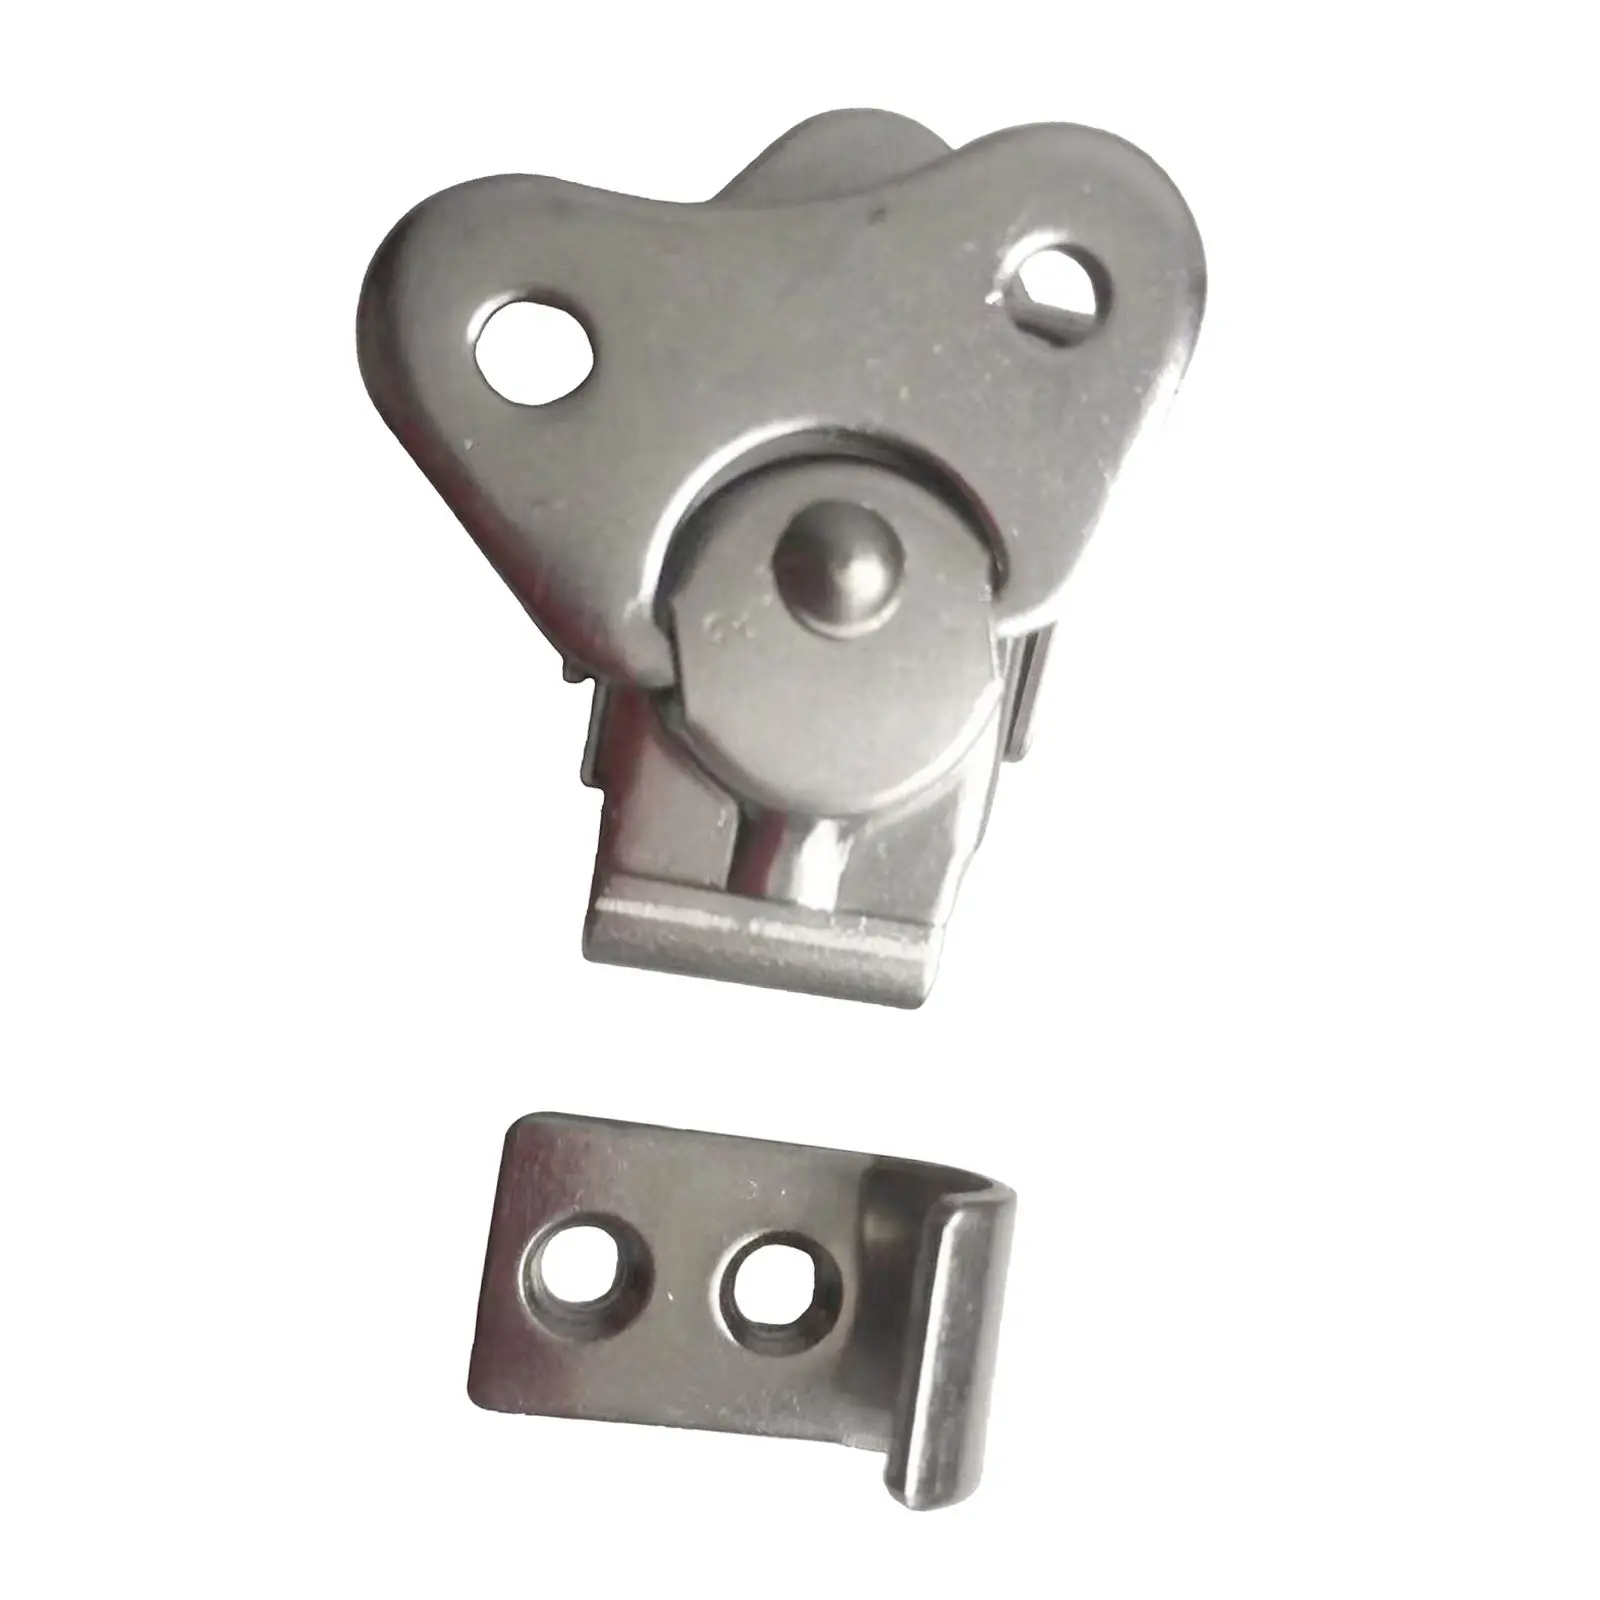 Marine/Yachts/Boat Hasp Latch Lock Safety Hasp Back Plate Rustproof Silver 